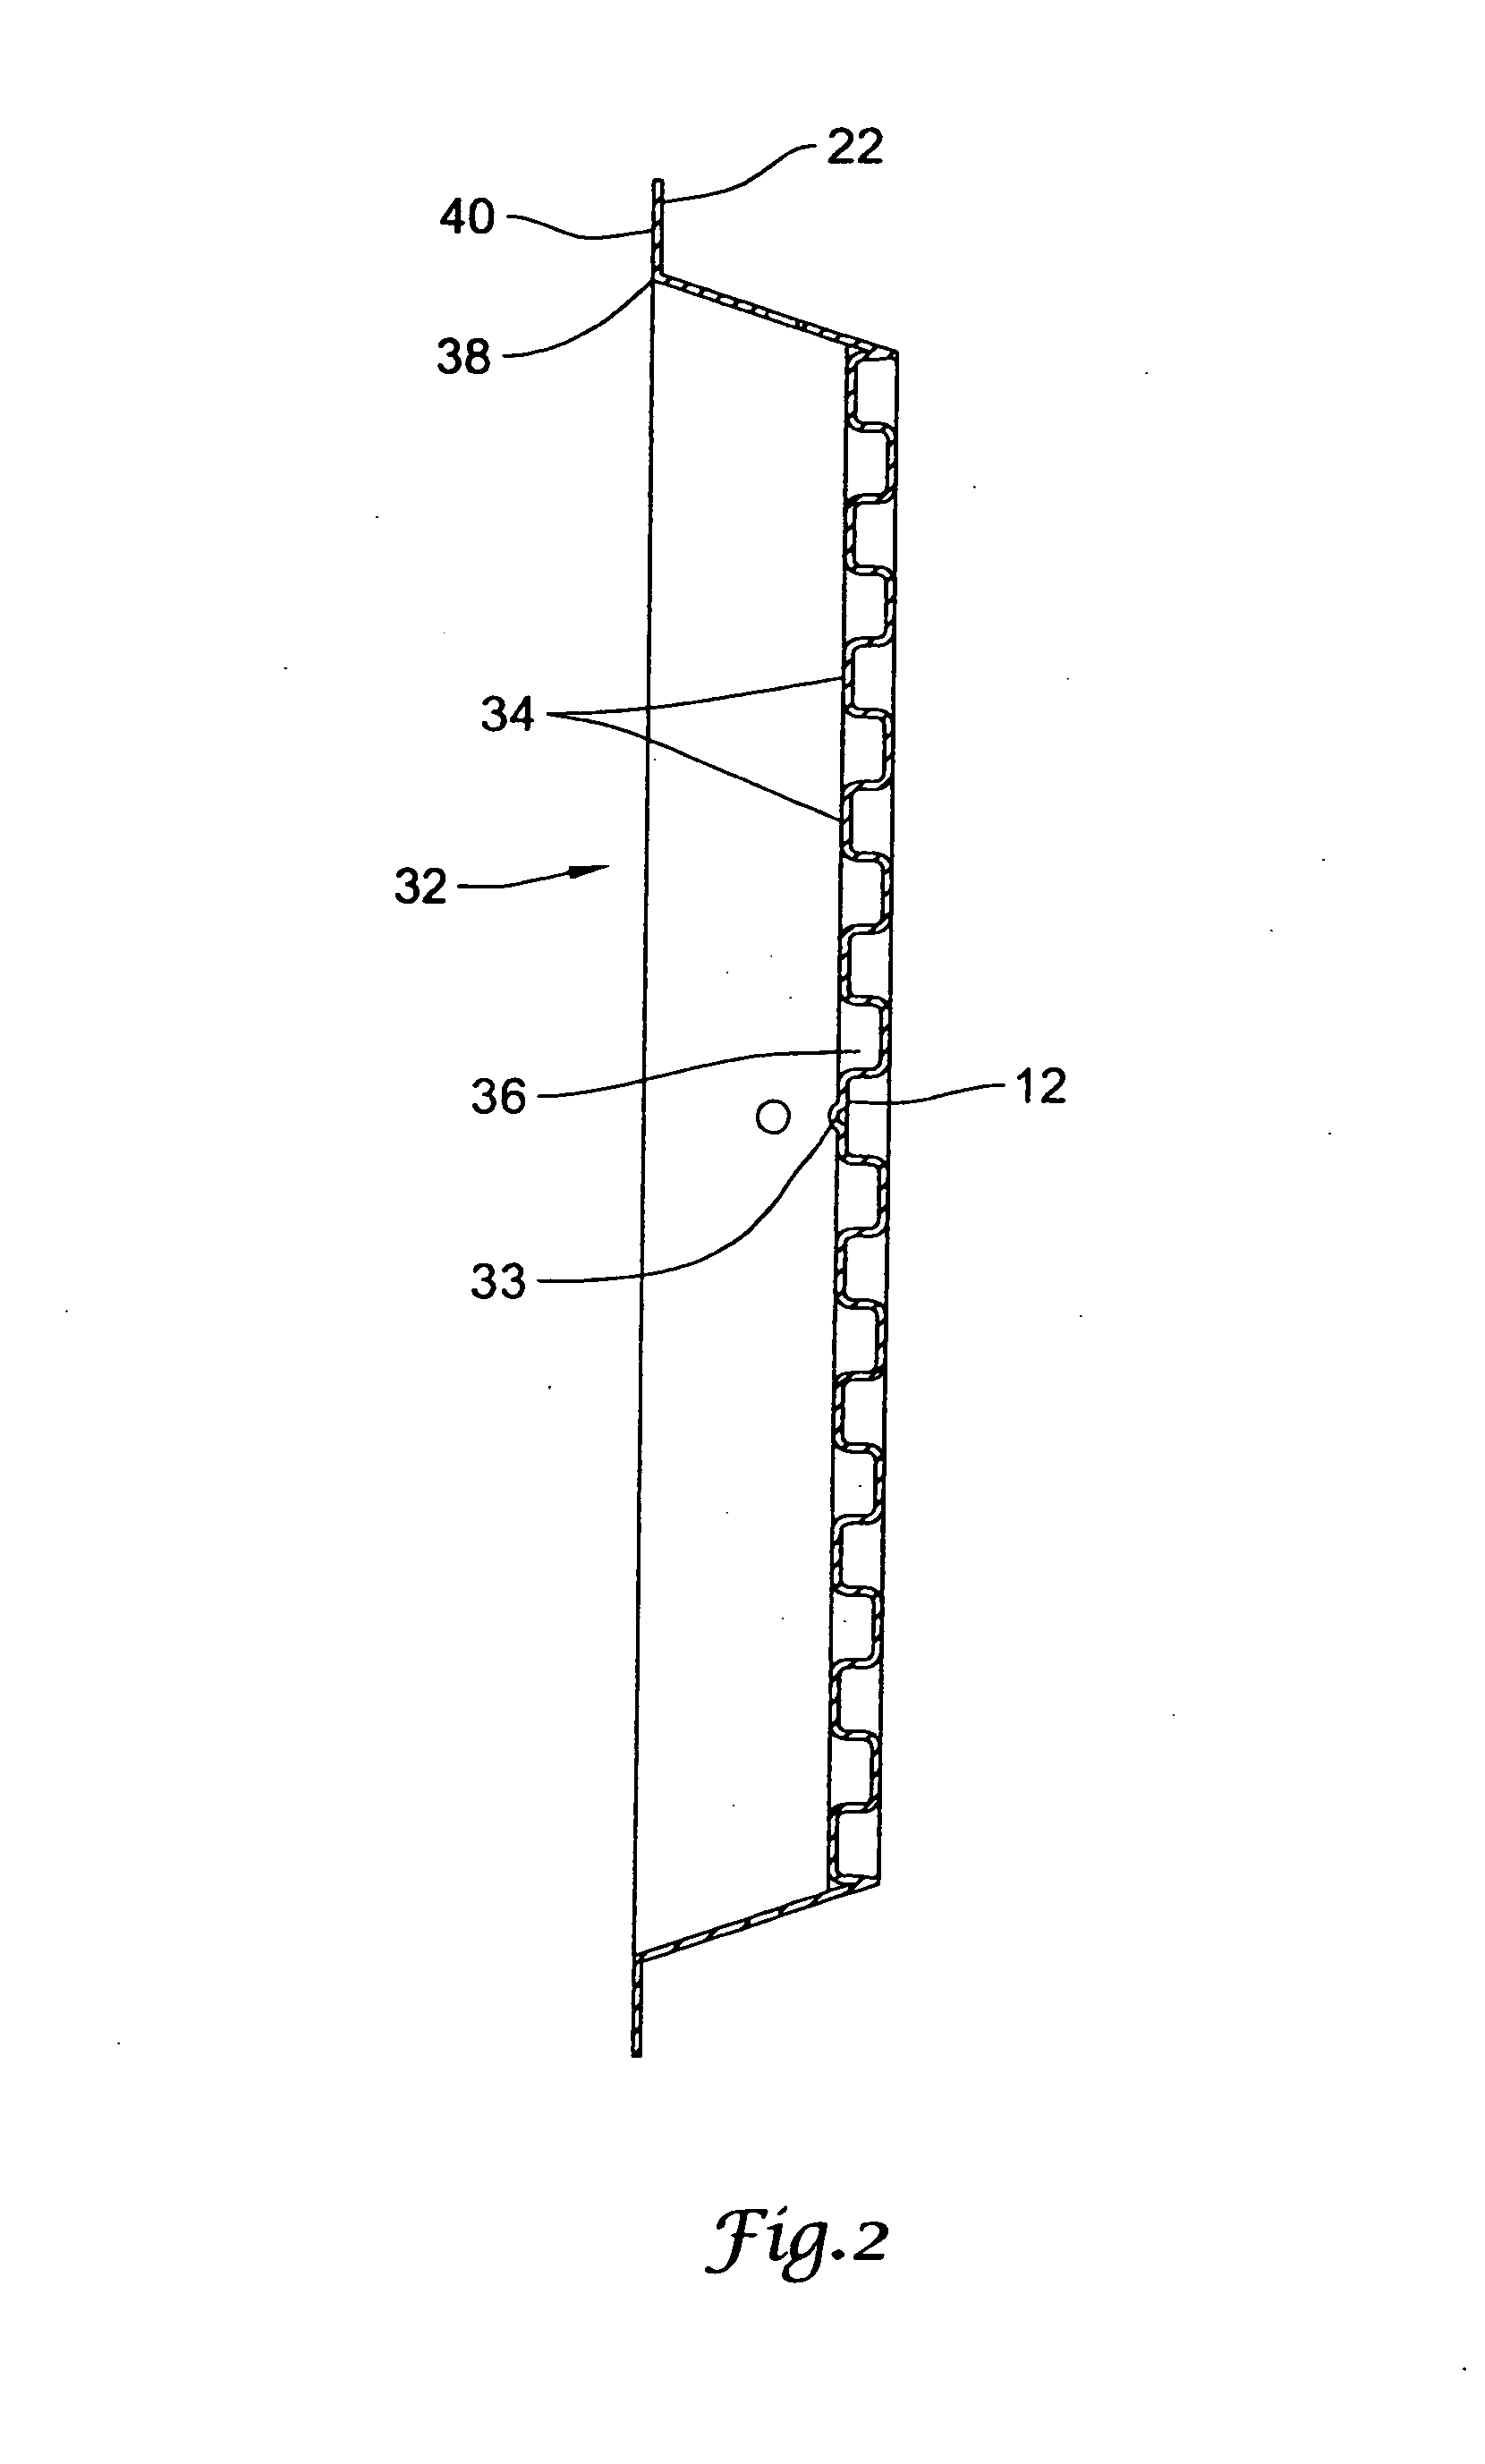 Receptacle for enclosing low-voltage electronic devices in a wall